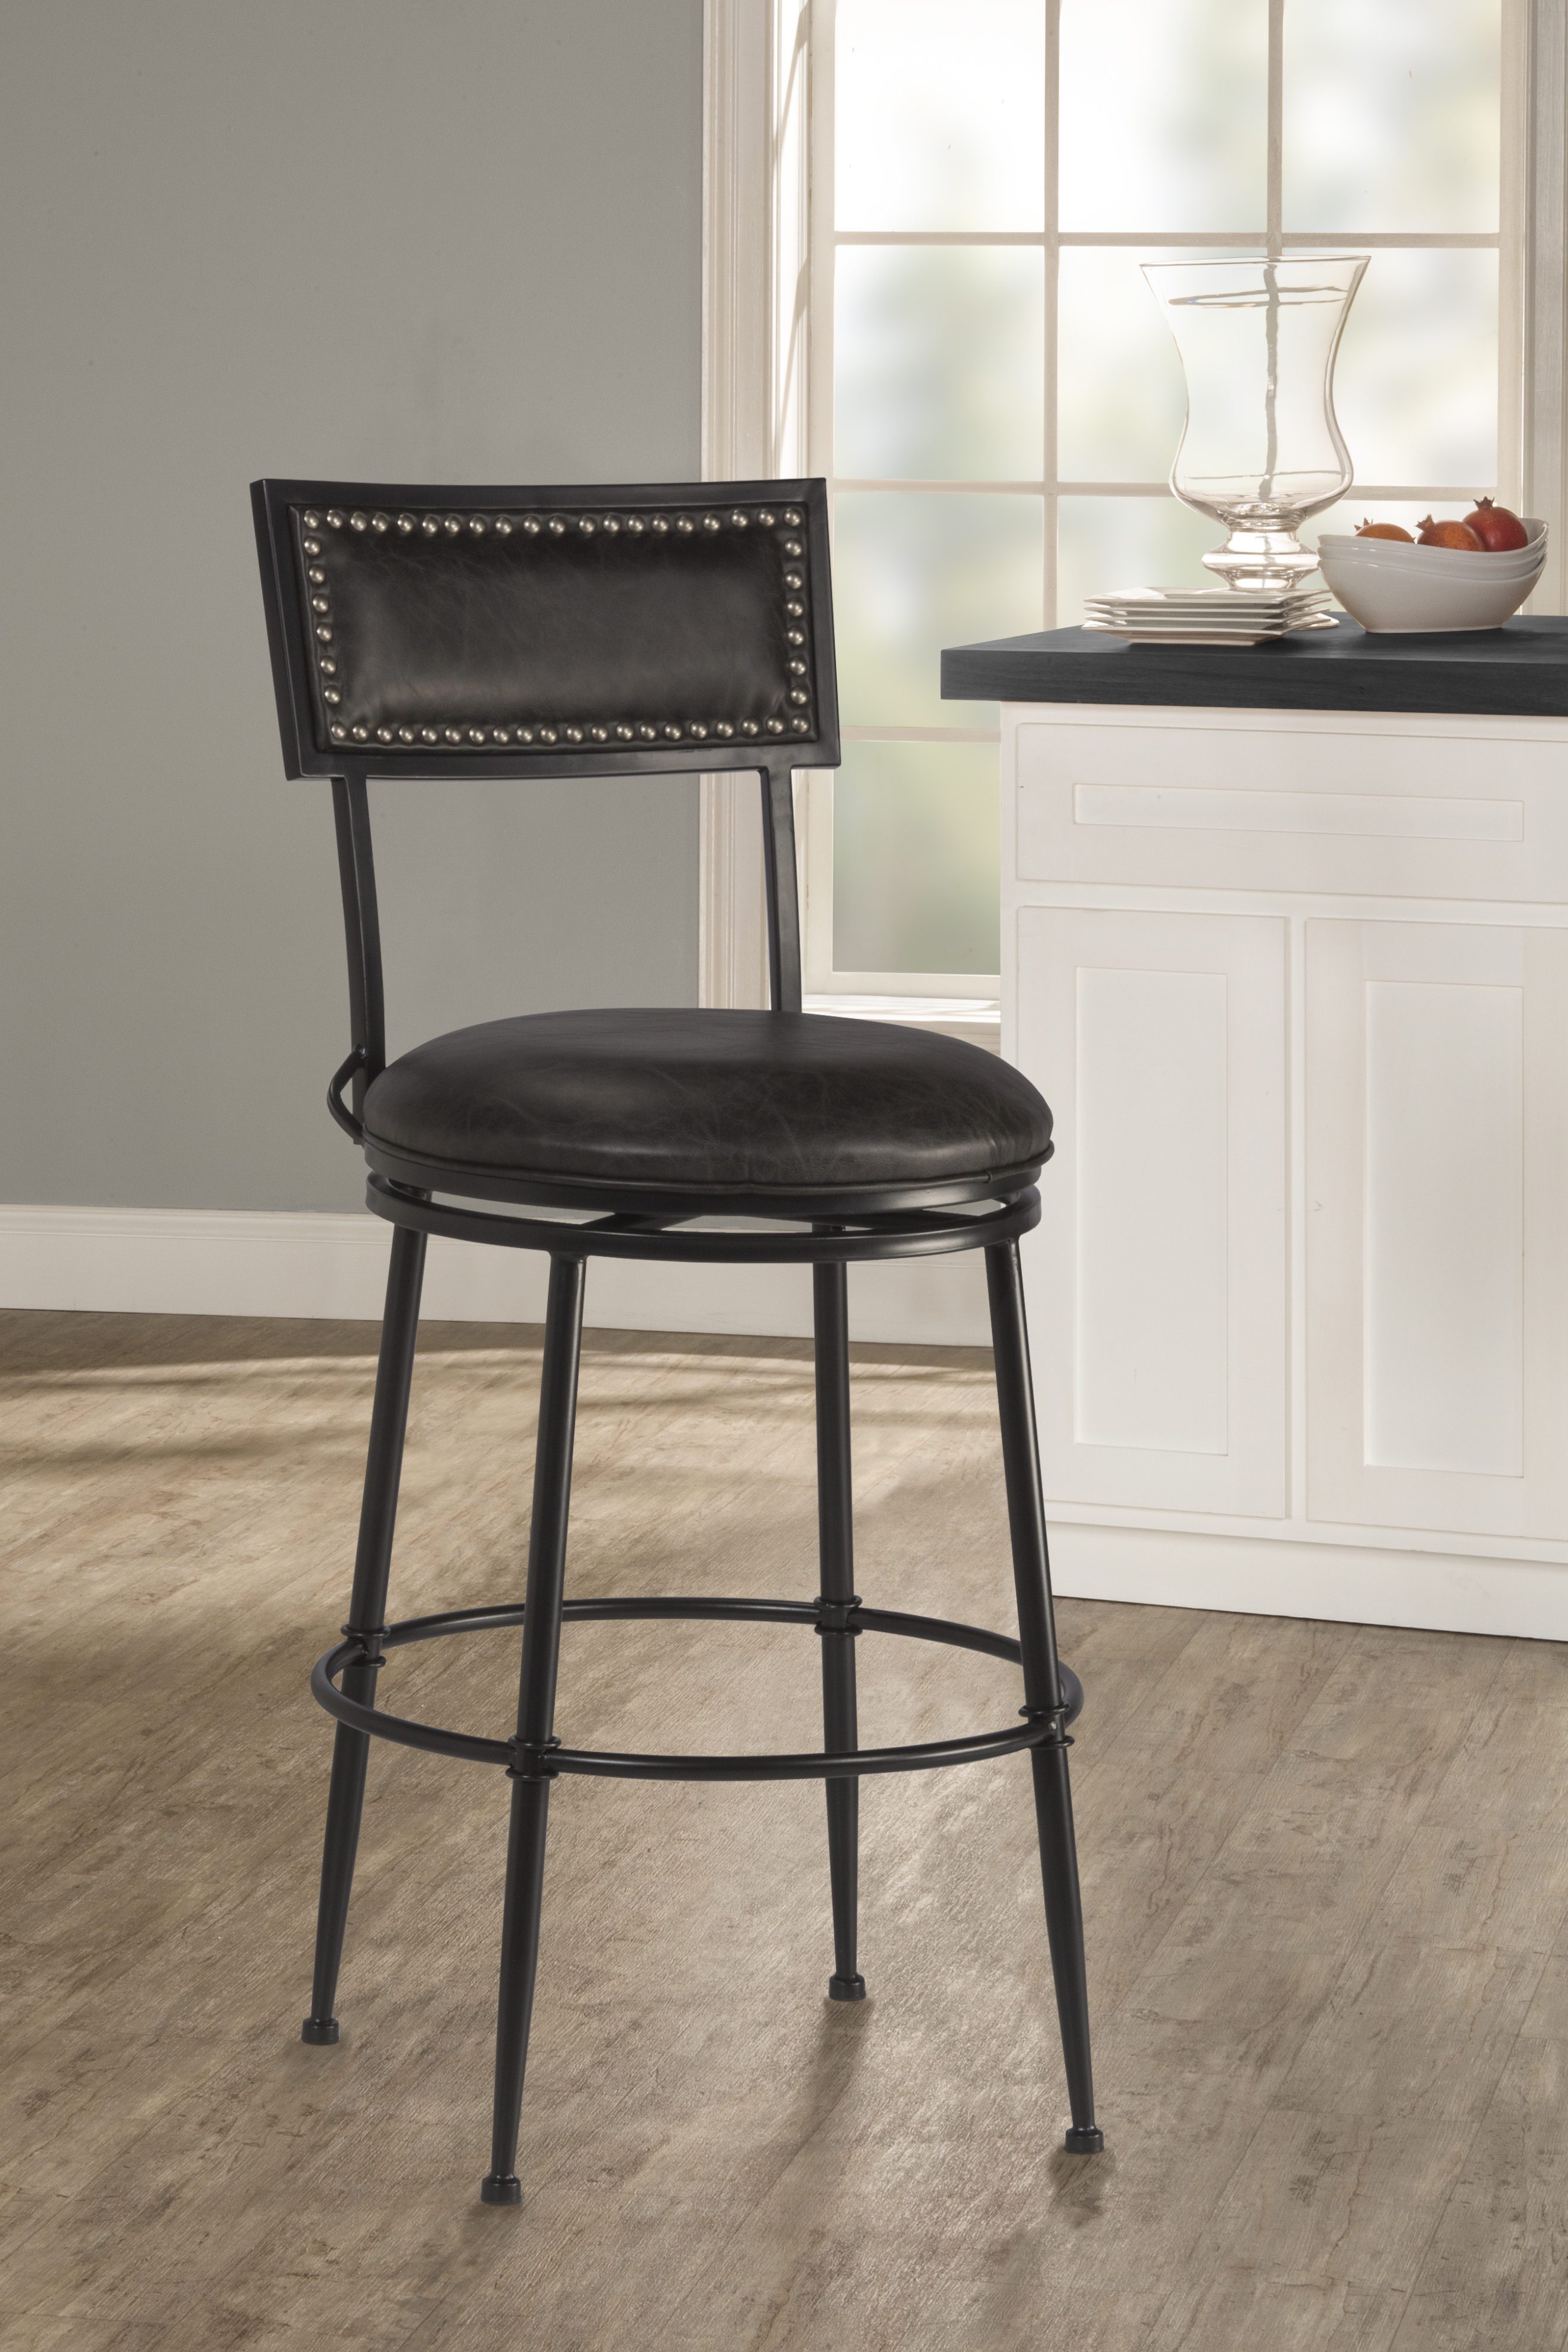 Theilman Commercial Counter Stool, Bar Stools Des Moines